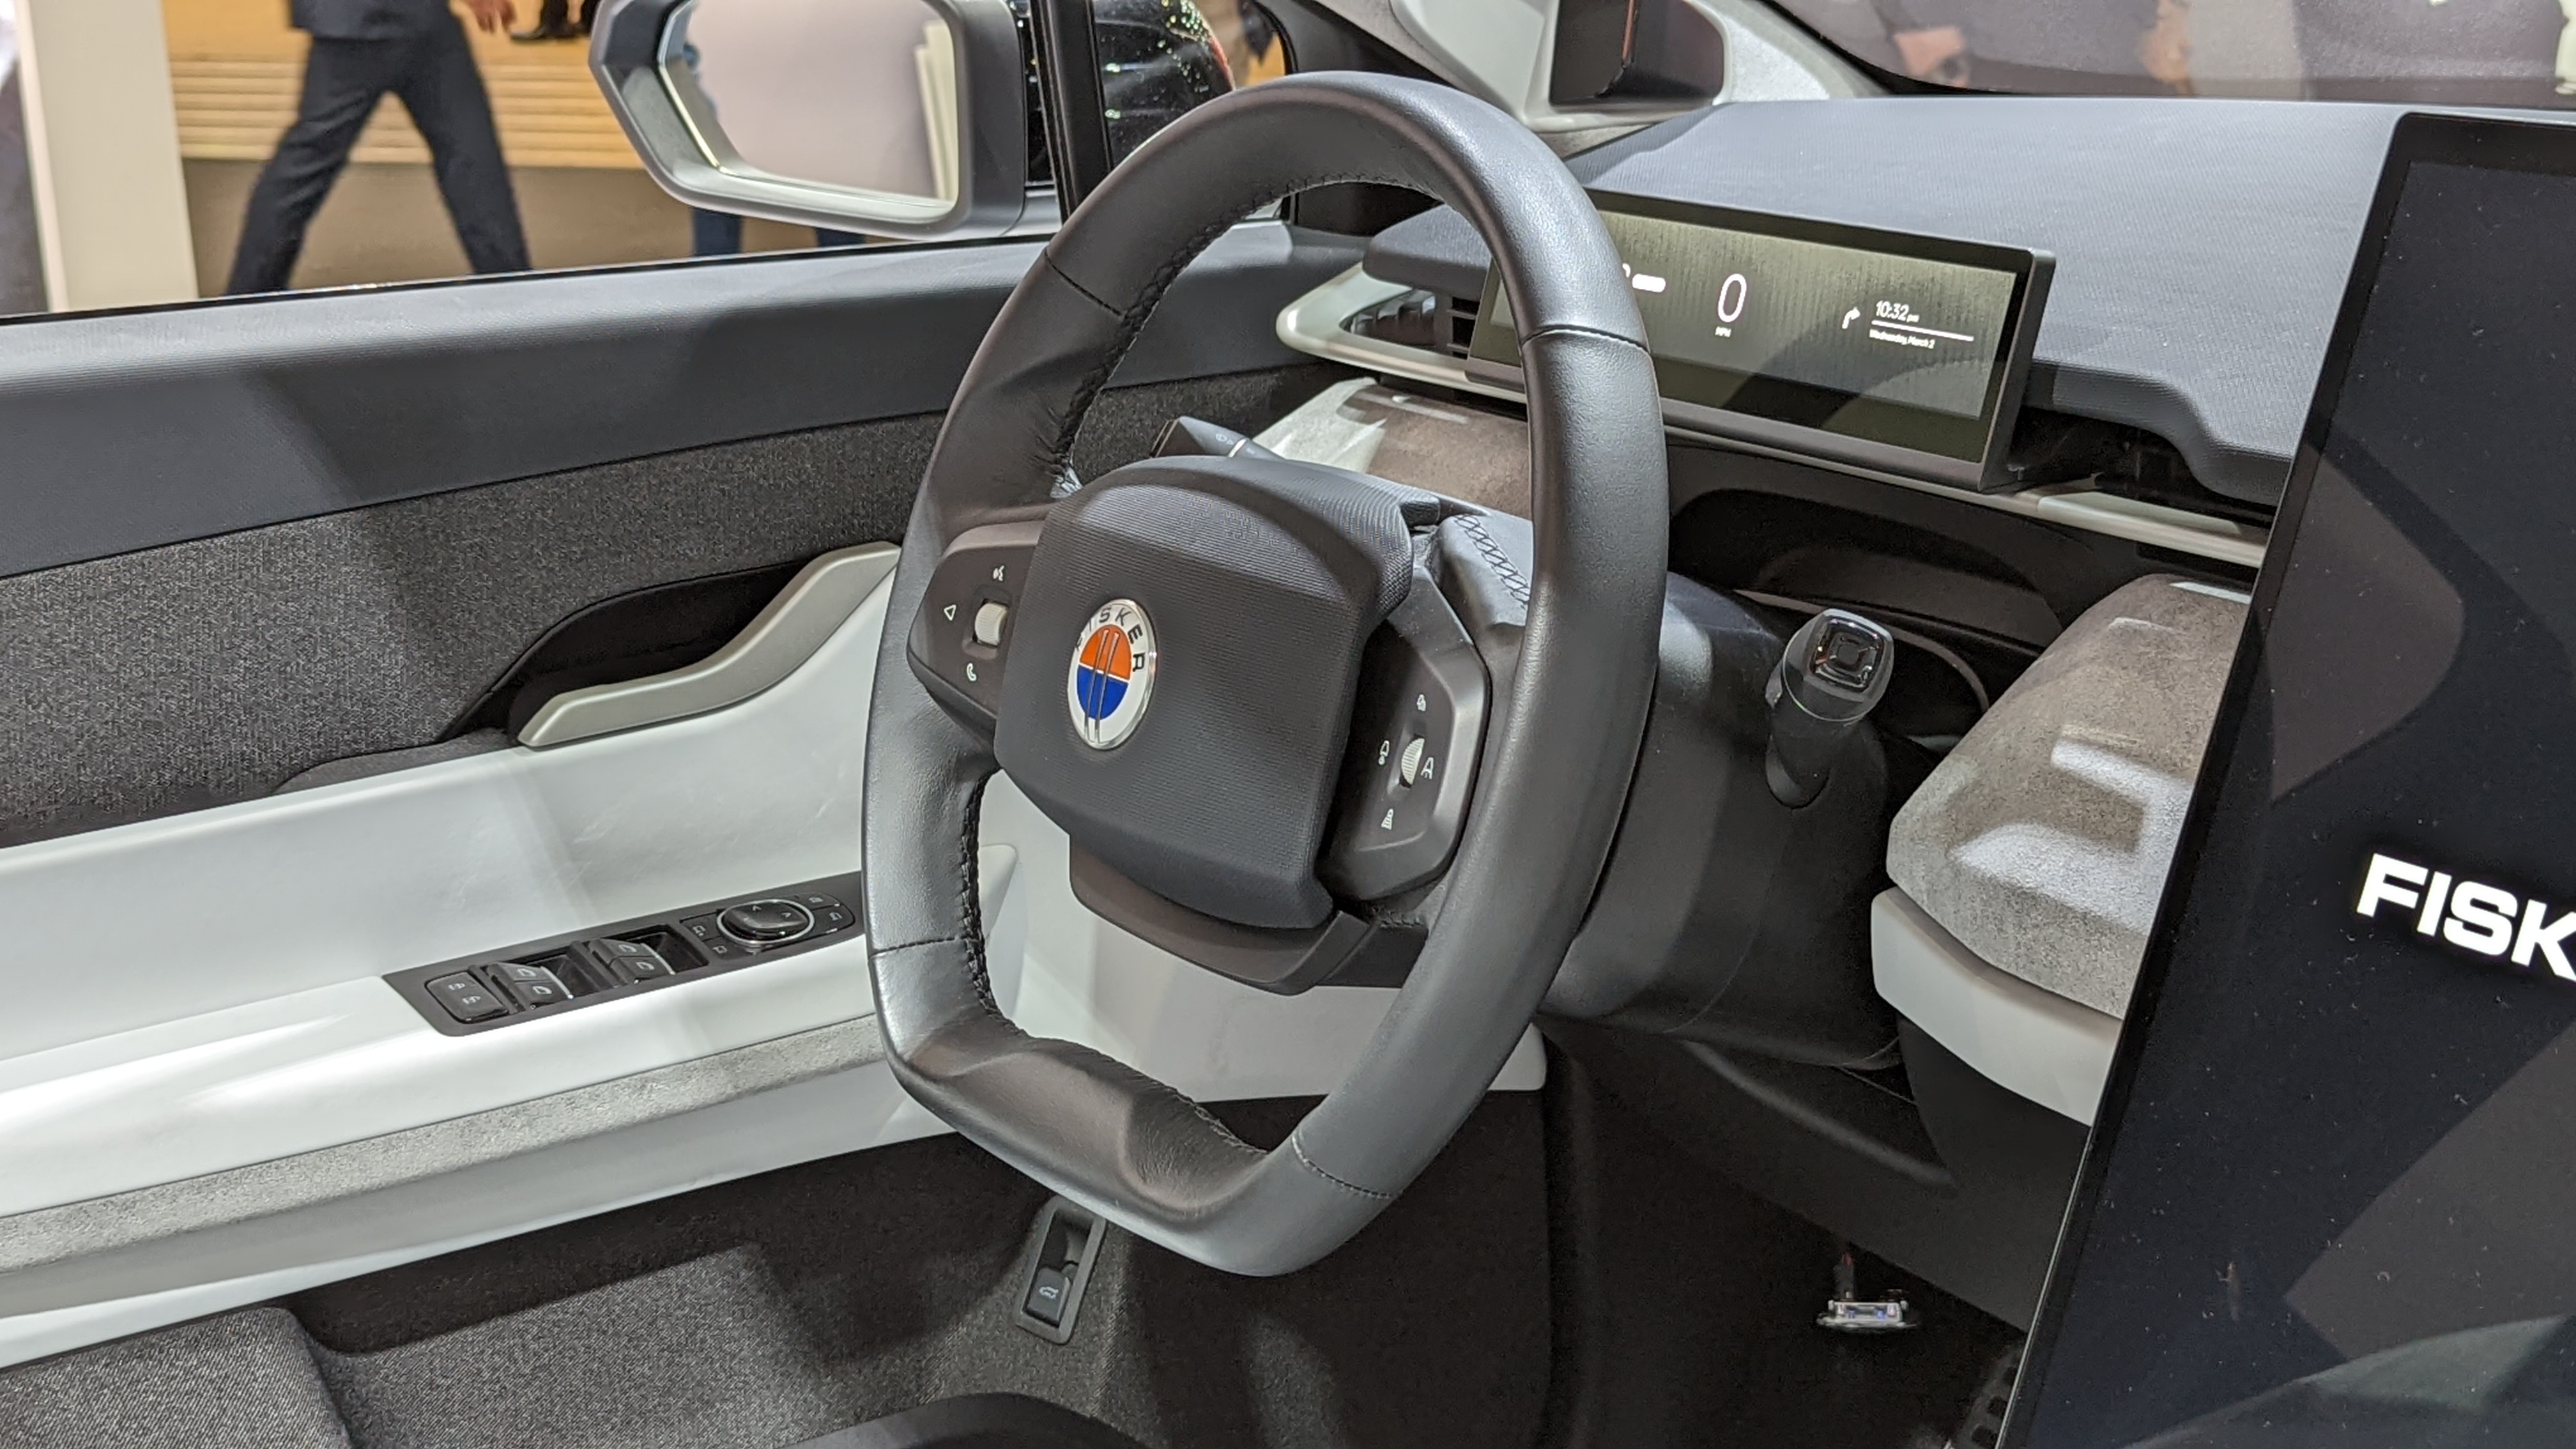 Angled view of steering wheel